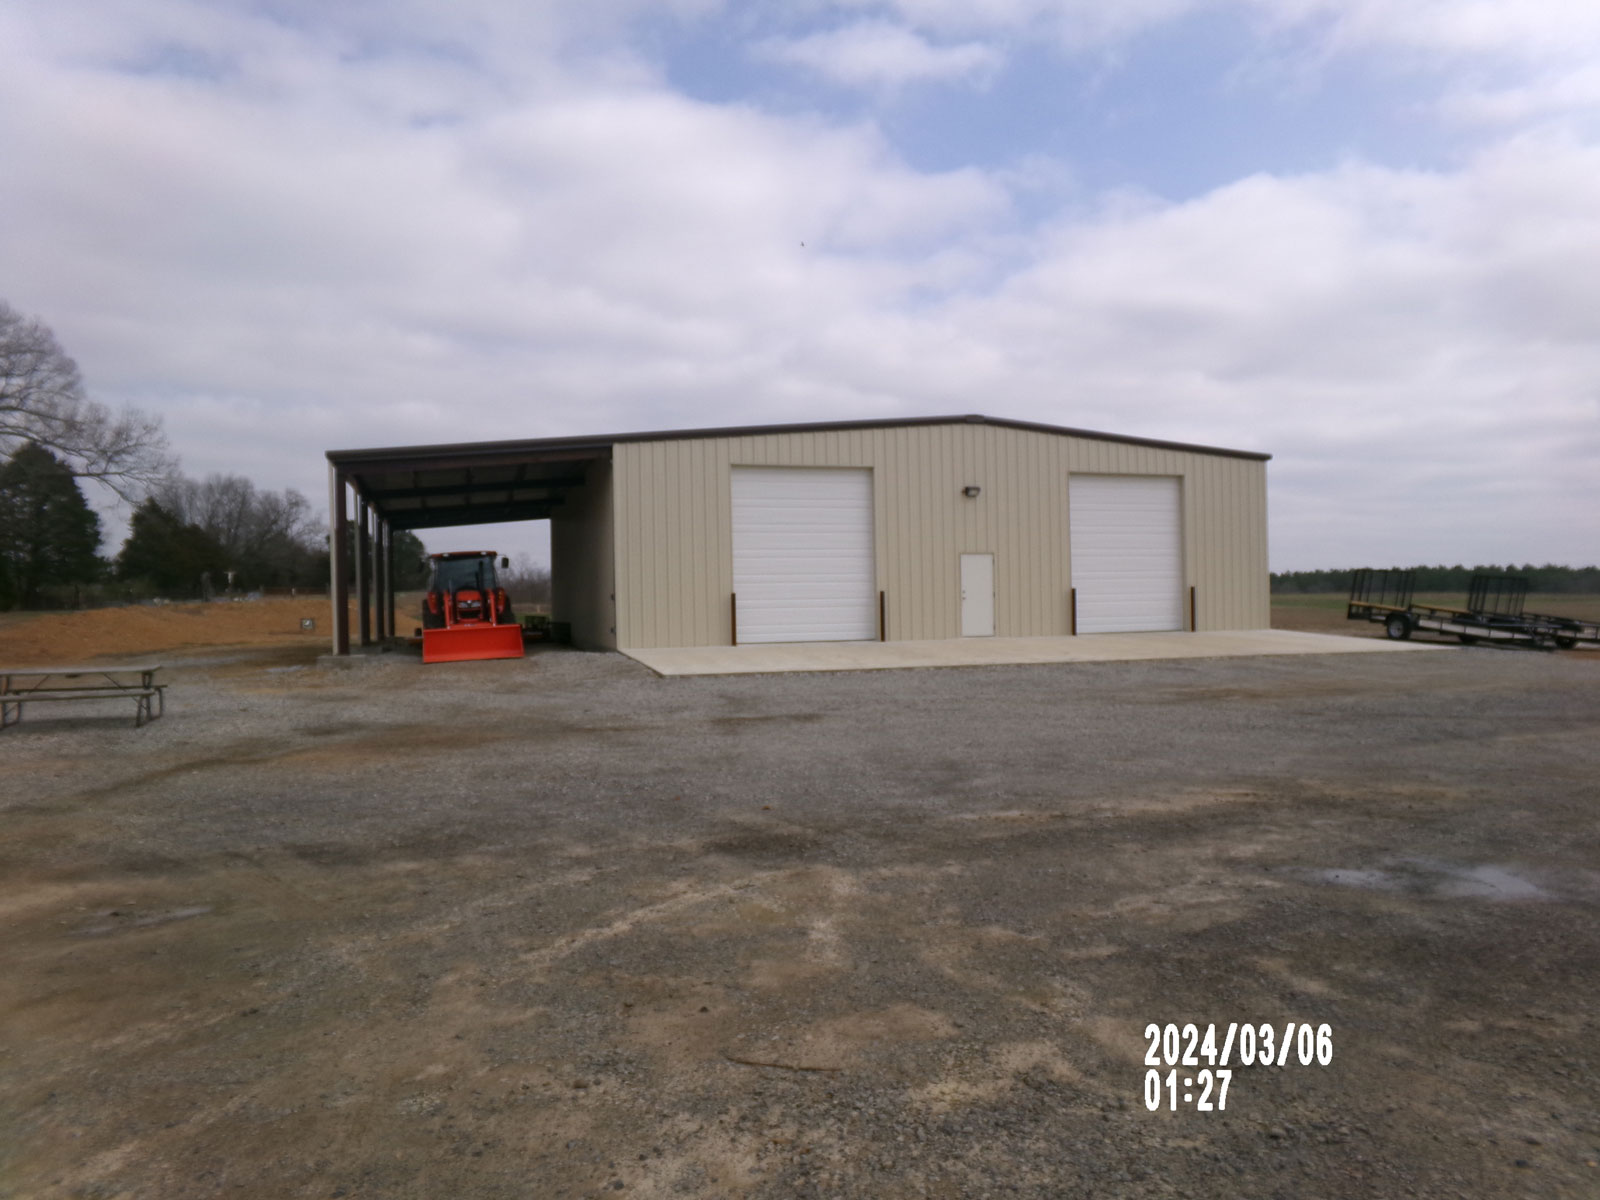 Barn garage with lean50’x100’x16’ with 20’x100’ open wall lean to Red iron column frame 26 gauge roof 26 gauge walls Gutters and downspouts Camden mississippi approx location 2-14’x14’ roll up door 3” roof and wall insulation insulation 1-3070 steel walk doors